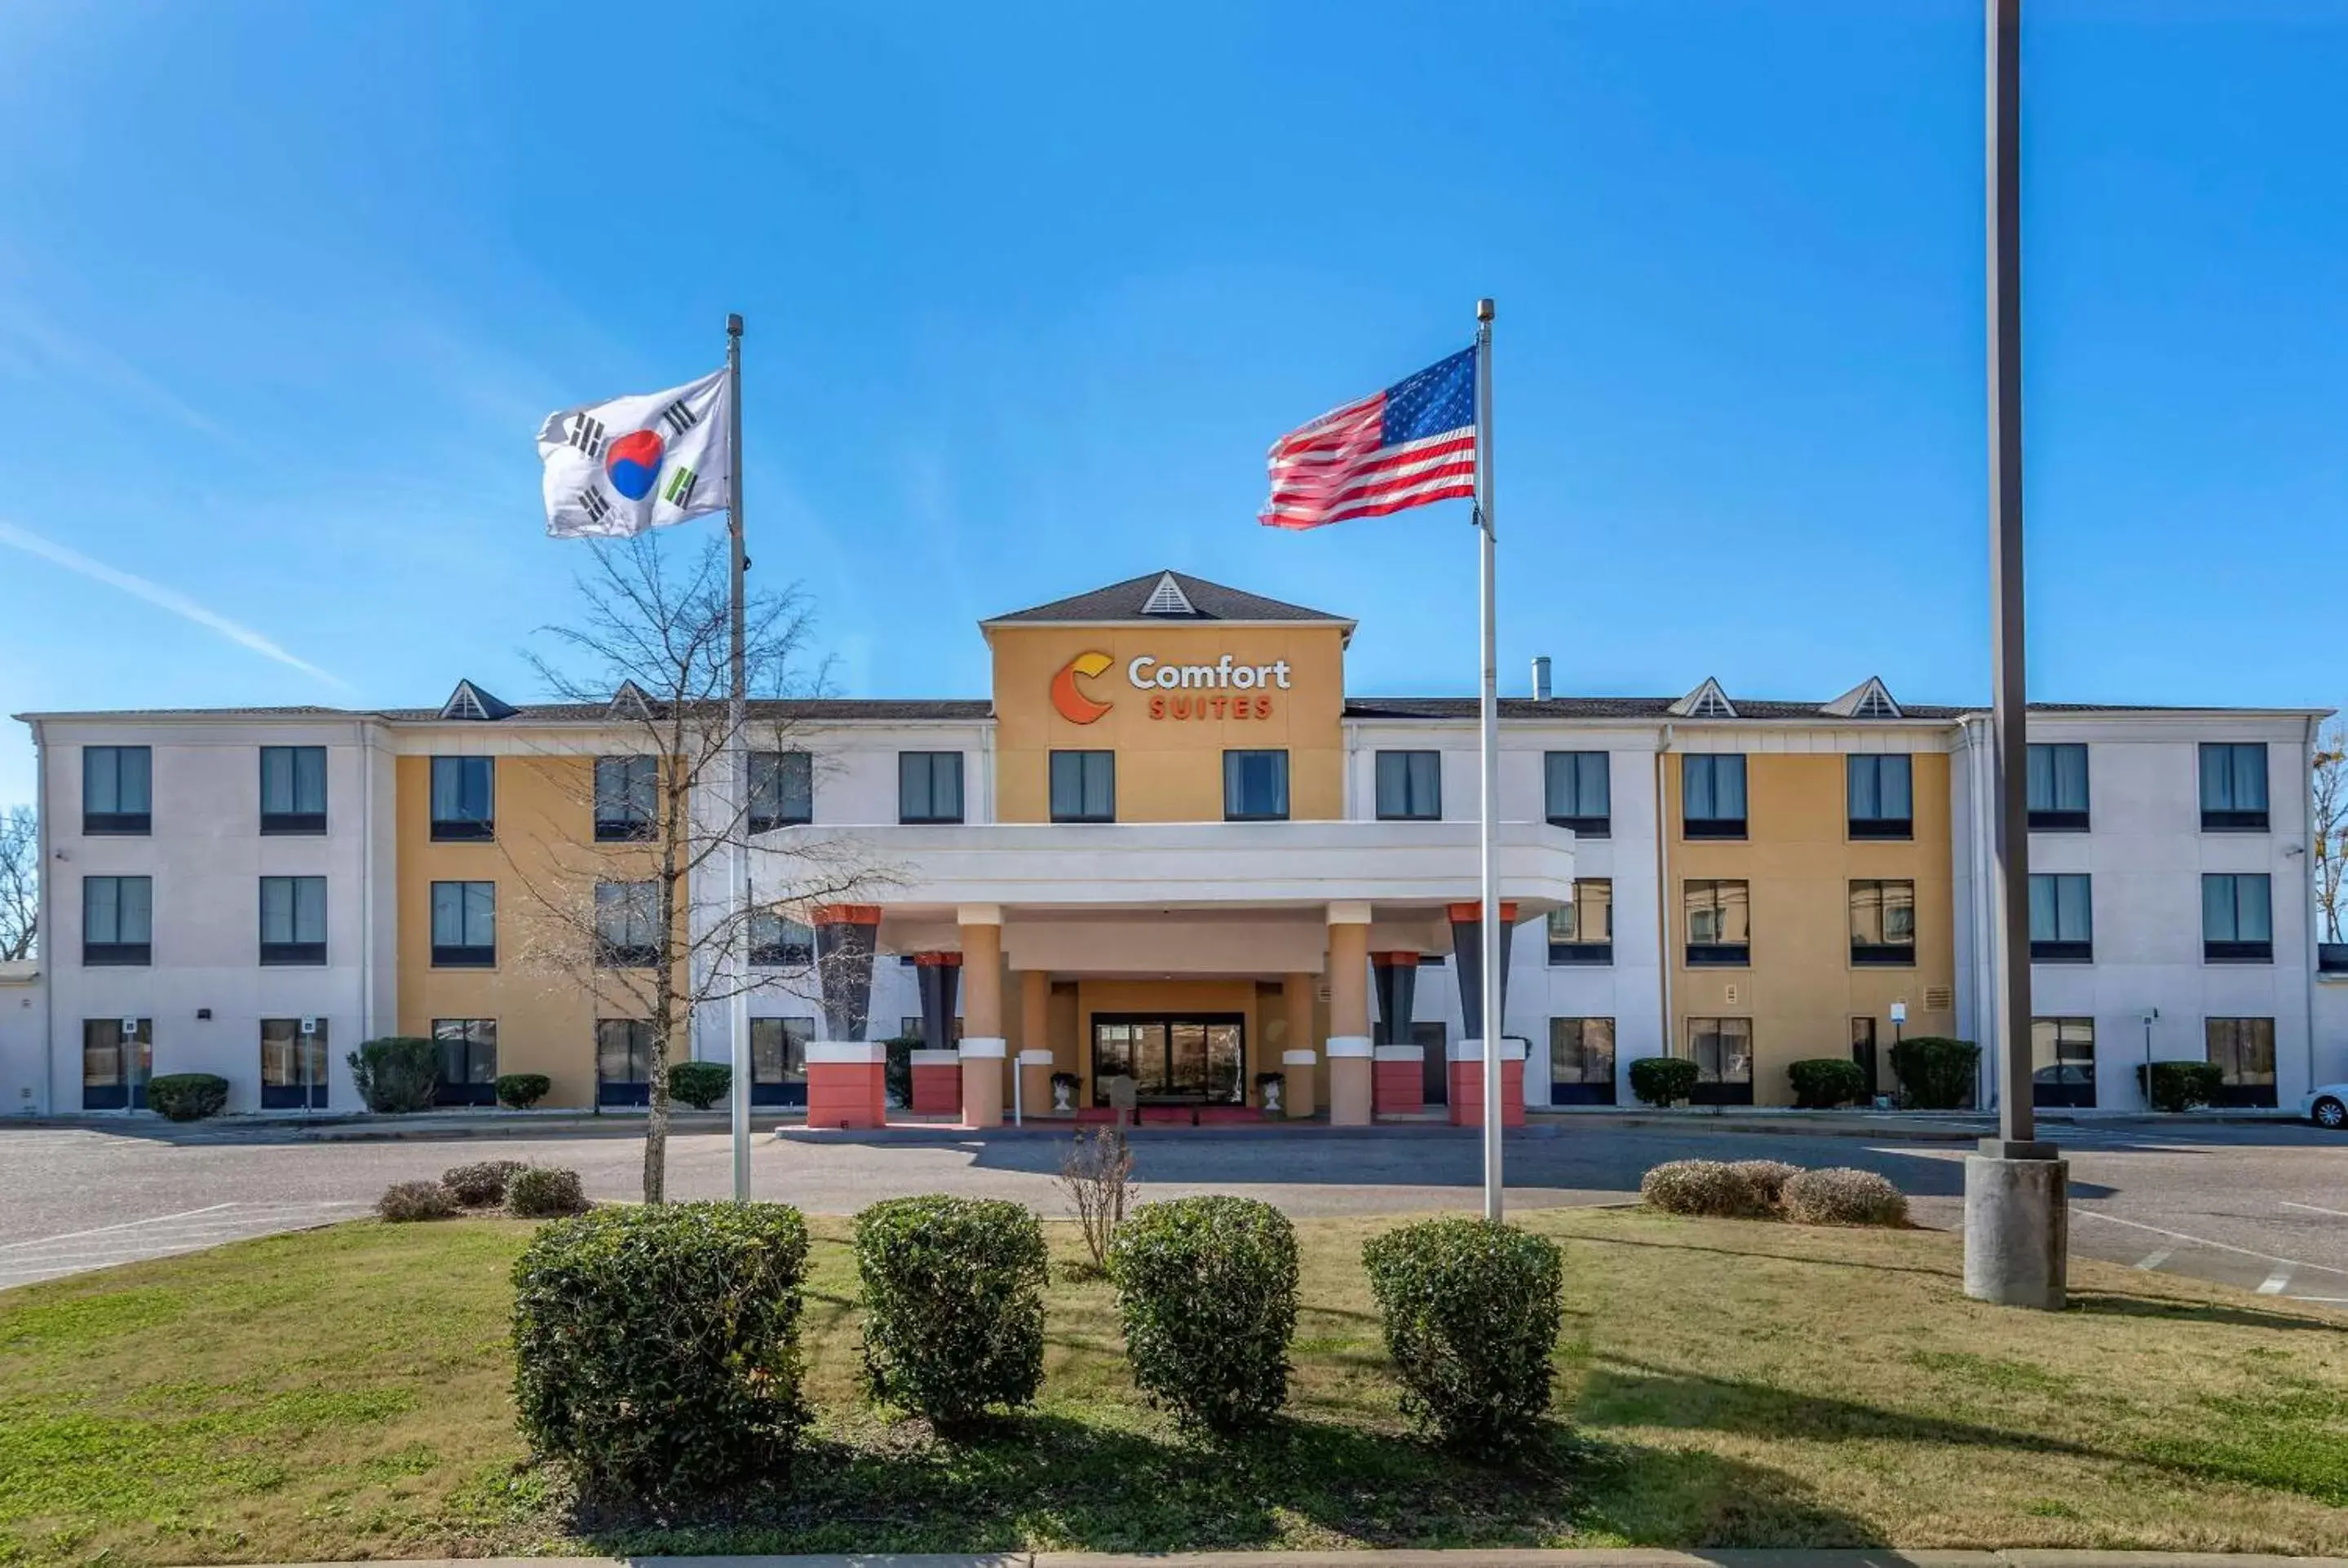 Property building in Comfort Suites Airport South